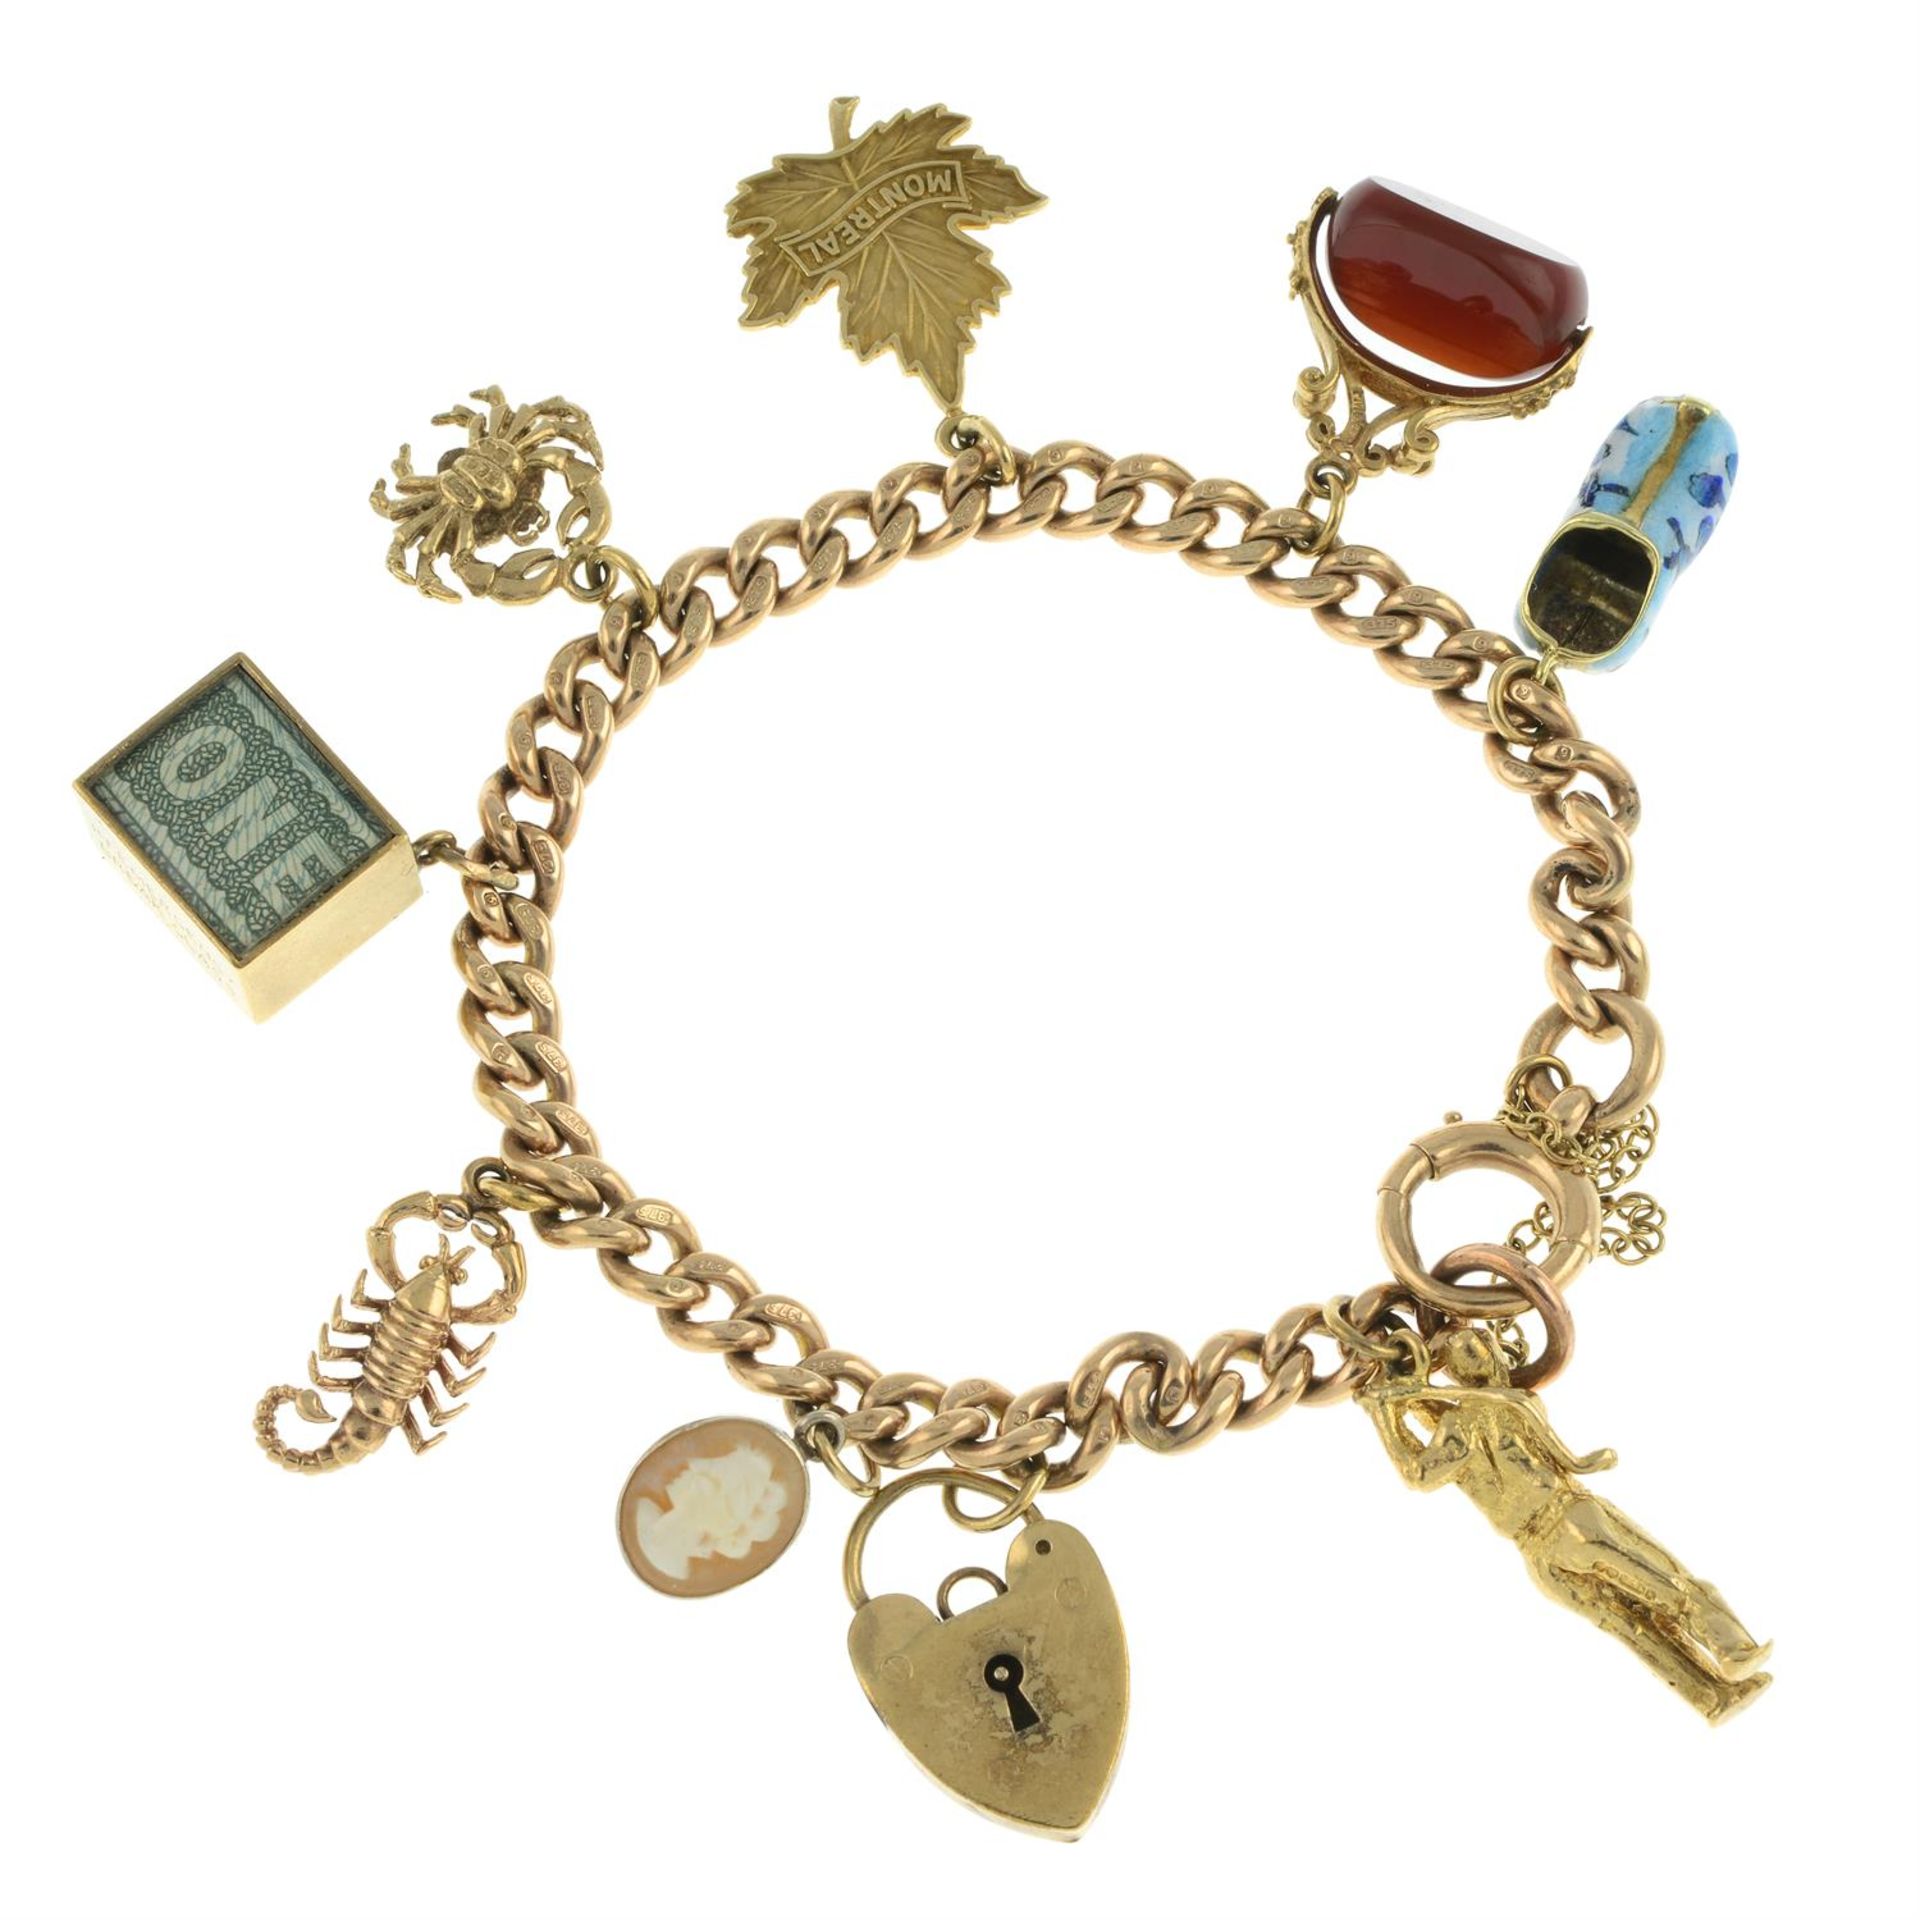 Mid 20th century 9ct gold bracelet, with variously designed charms